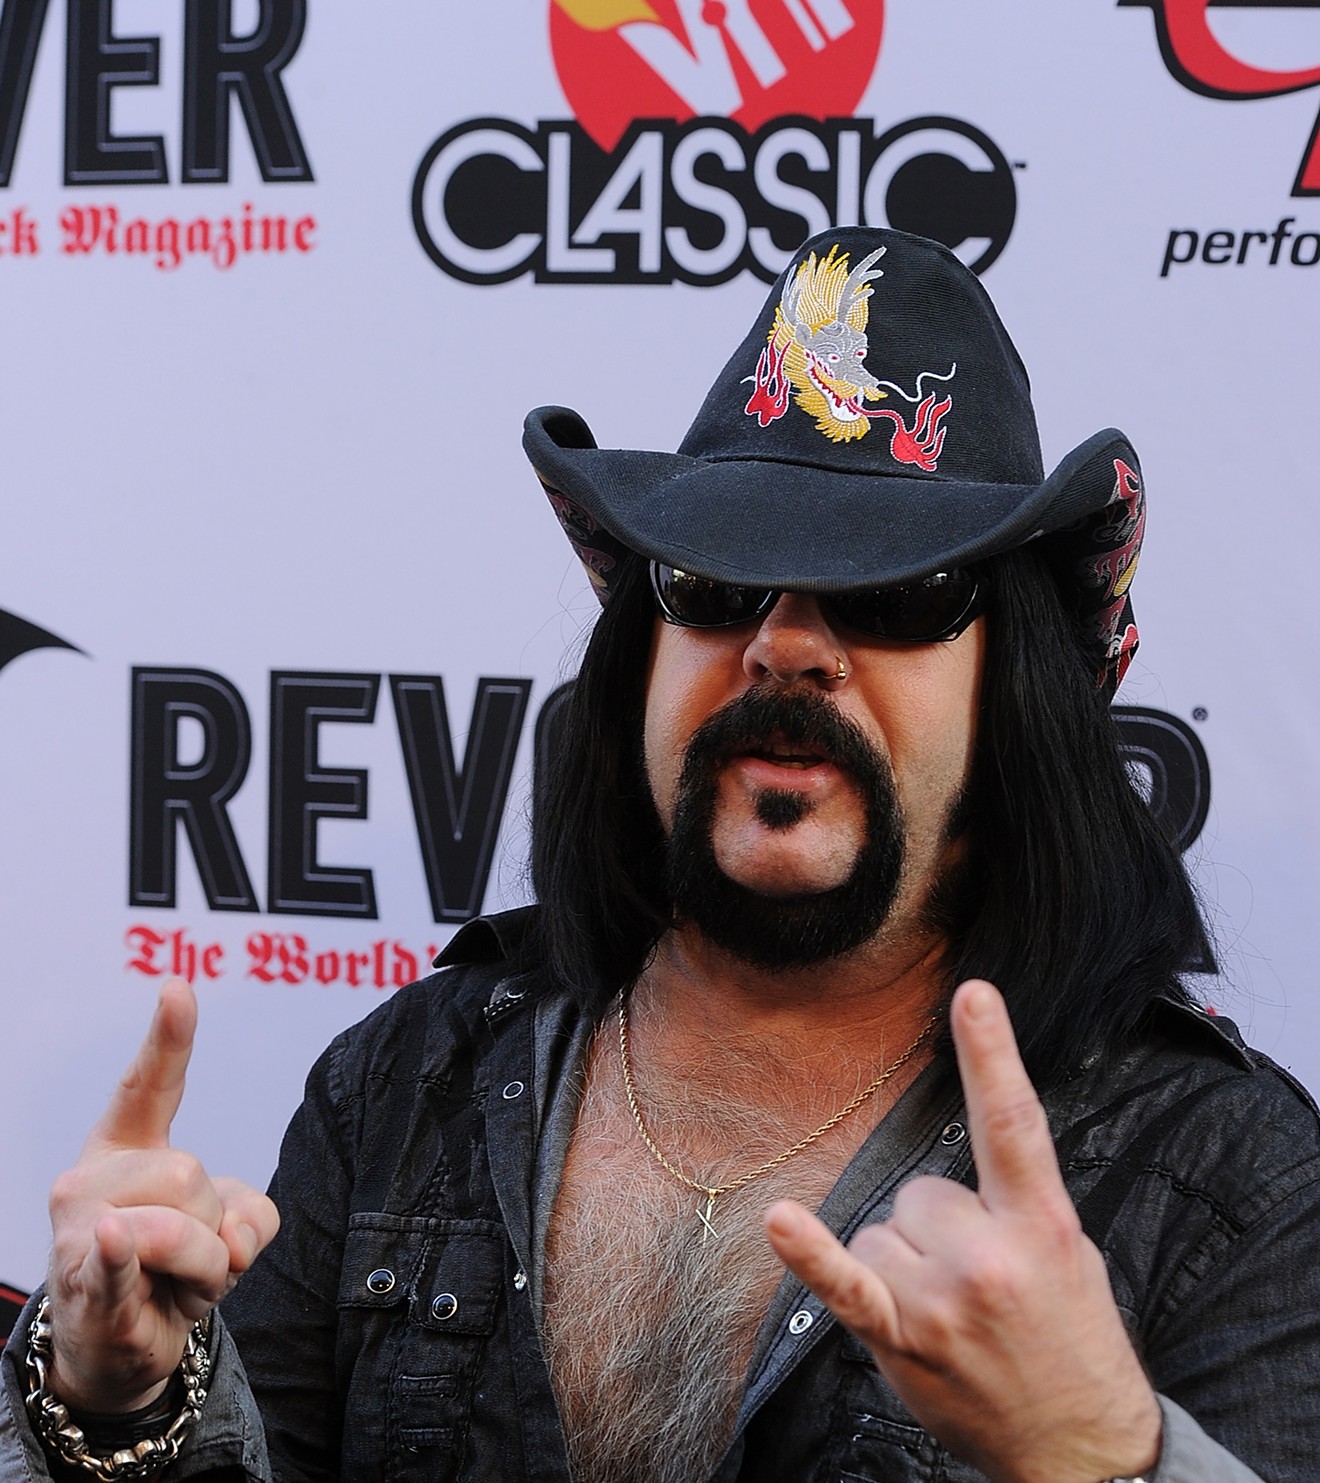 The late Pantera drummer Vinnie Paul left behind a legendary mansion that was torn down a few months ago.